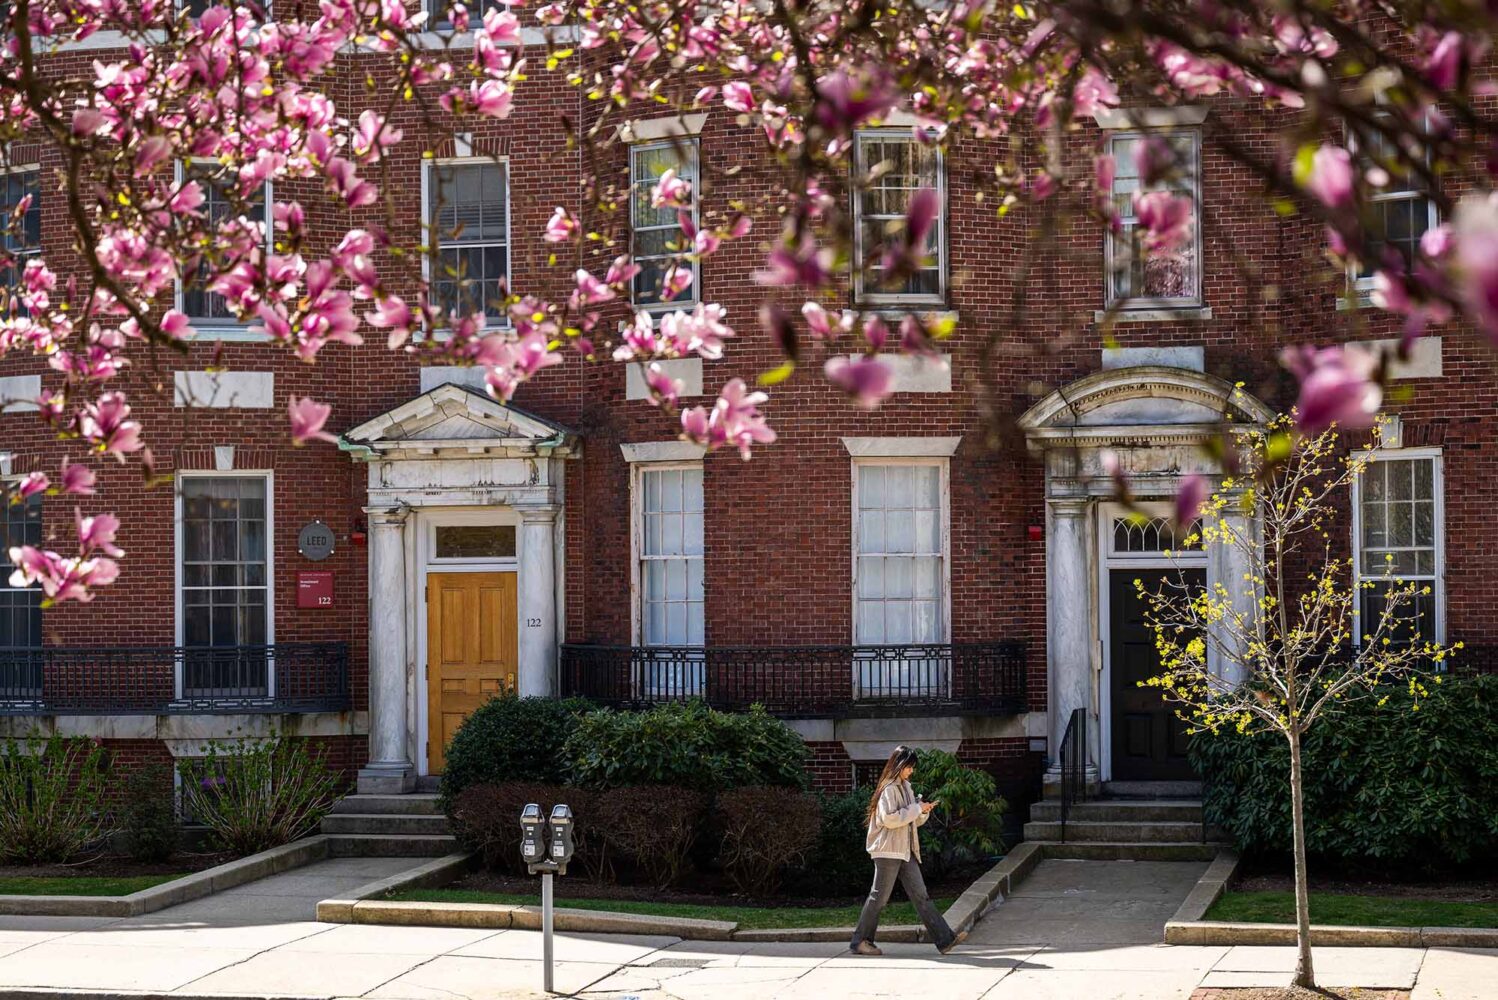 Photo: A picture of a woman walking down a city street with magnolias in bloom